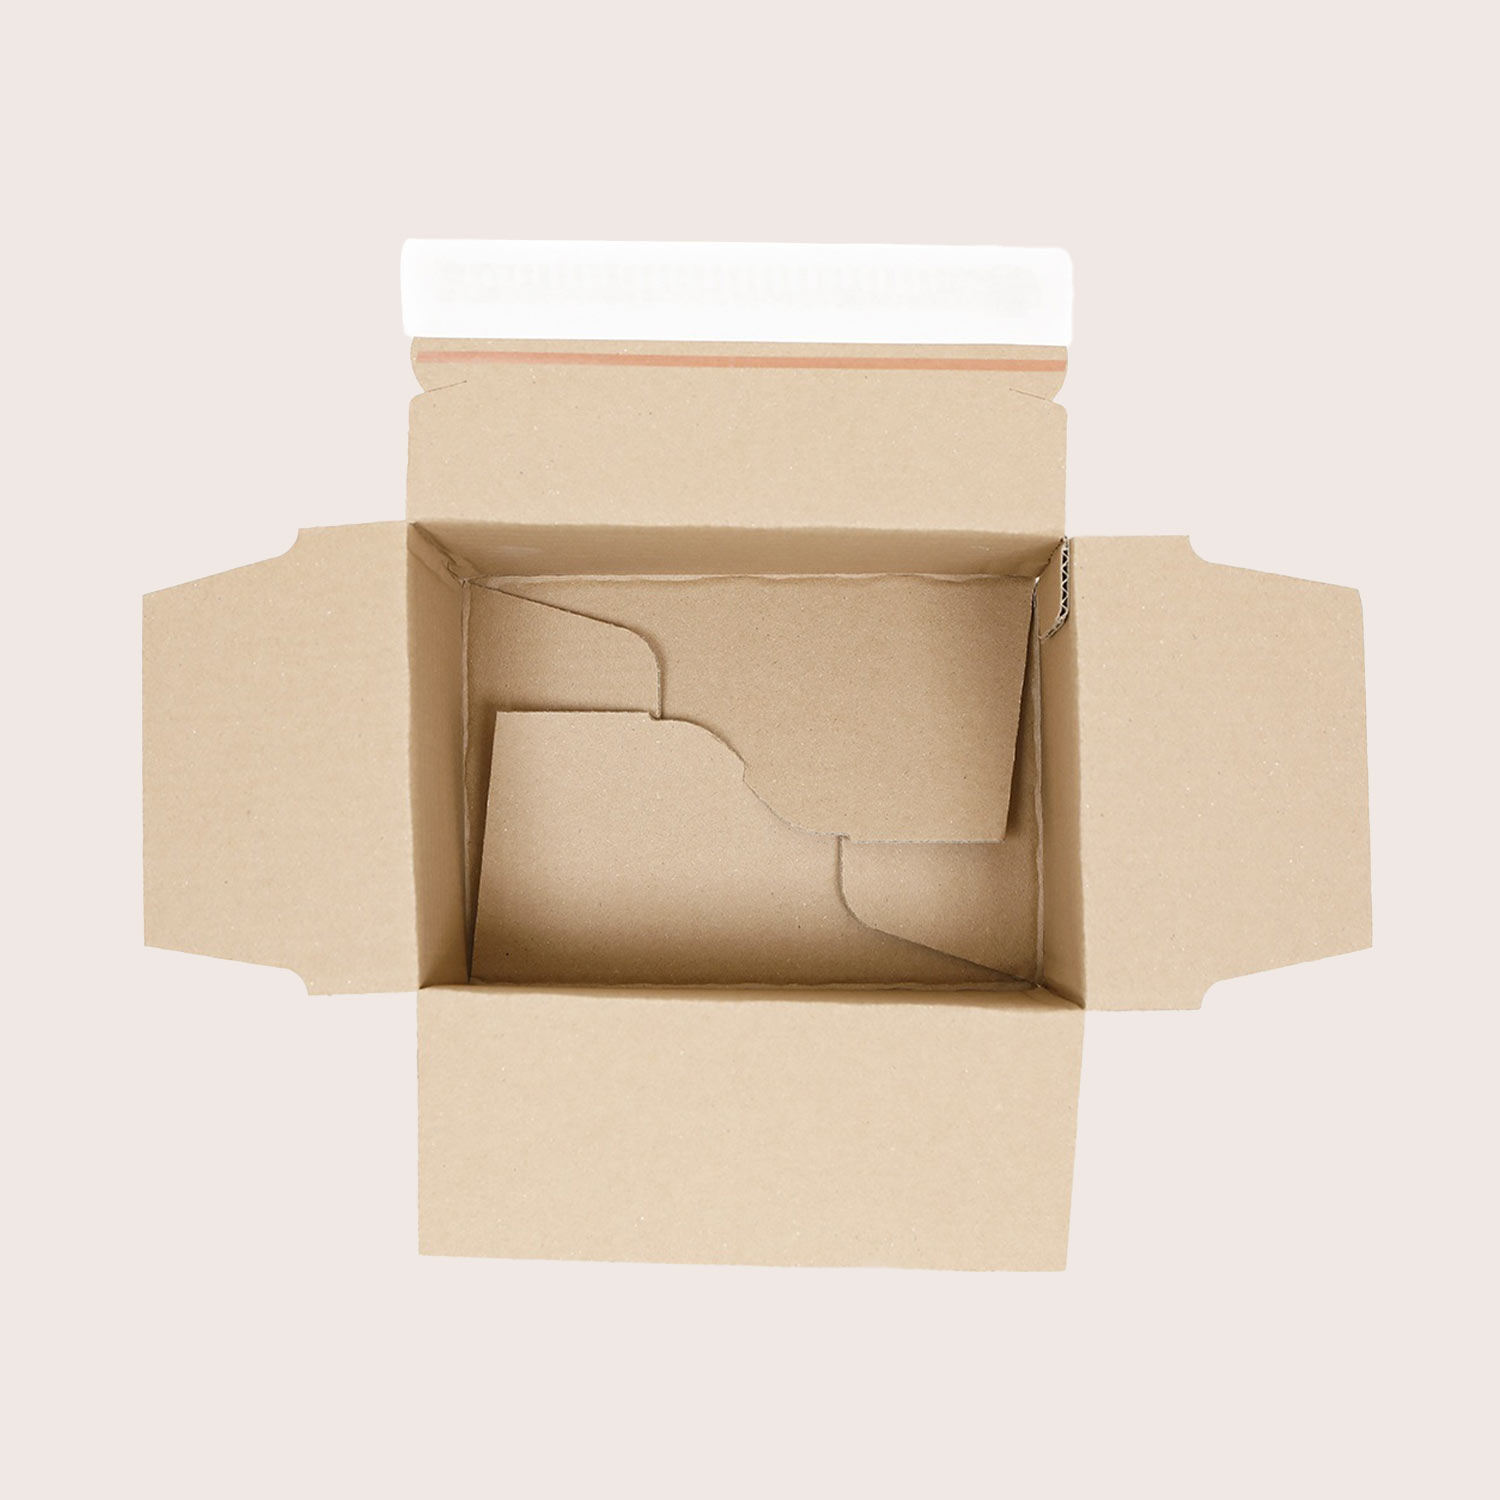 Cardboard box with an automatic base and self-adhesive closure